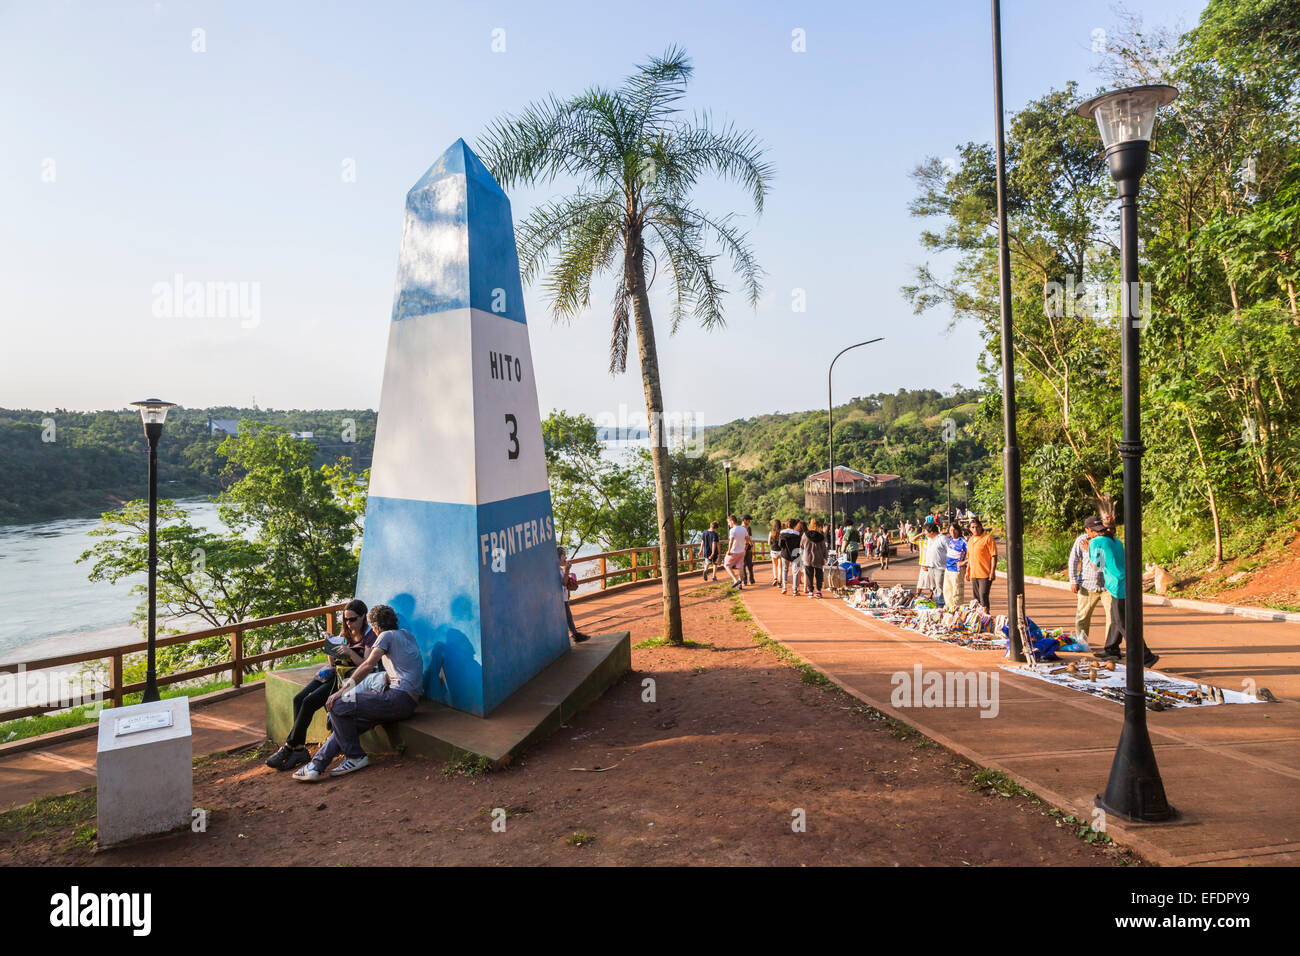 Monument in Puerto Iguazú marking the triple frontier of Argentina, Brazil and Paraguay, inscribed Hito 3 Fronteras Stock Photo